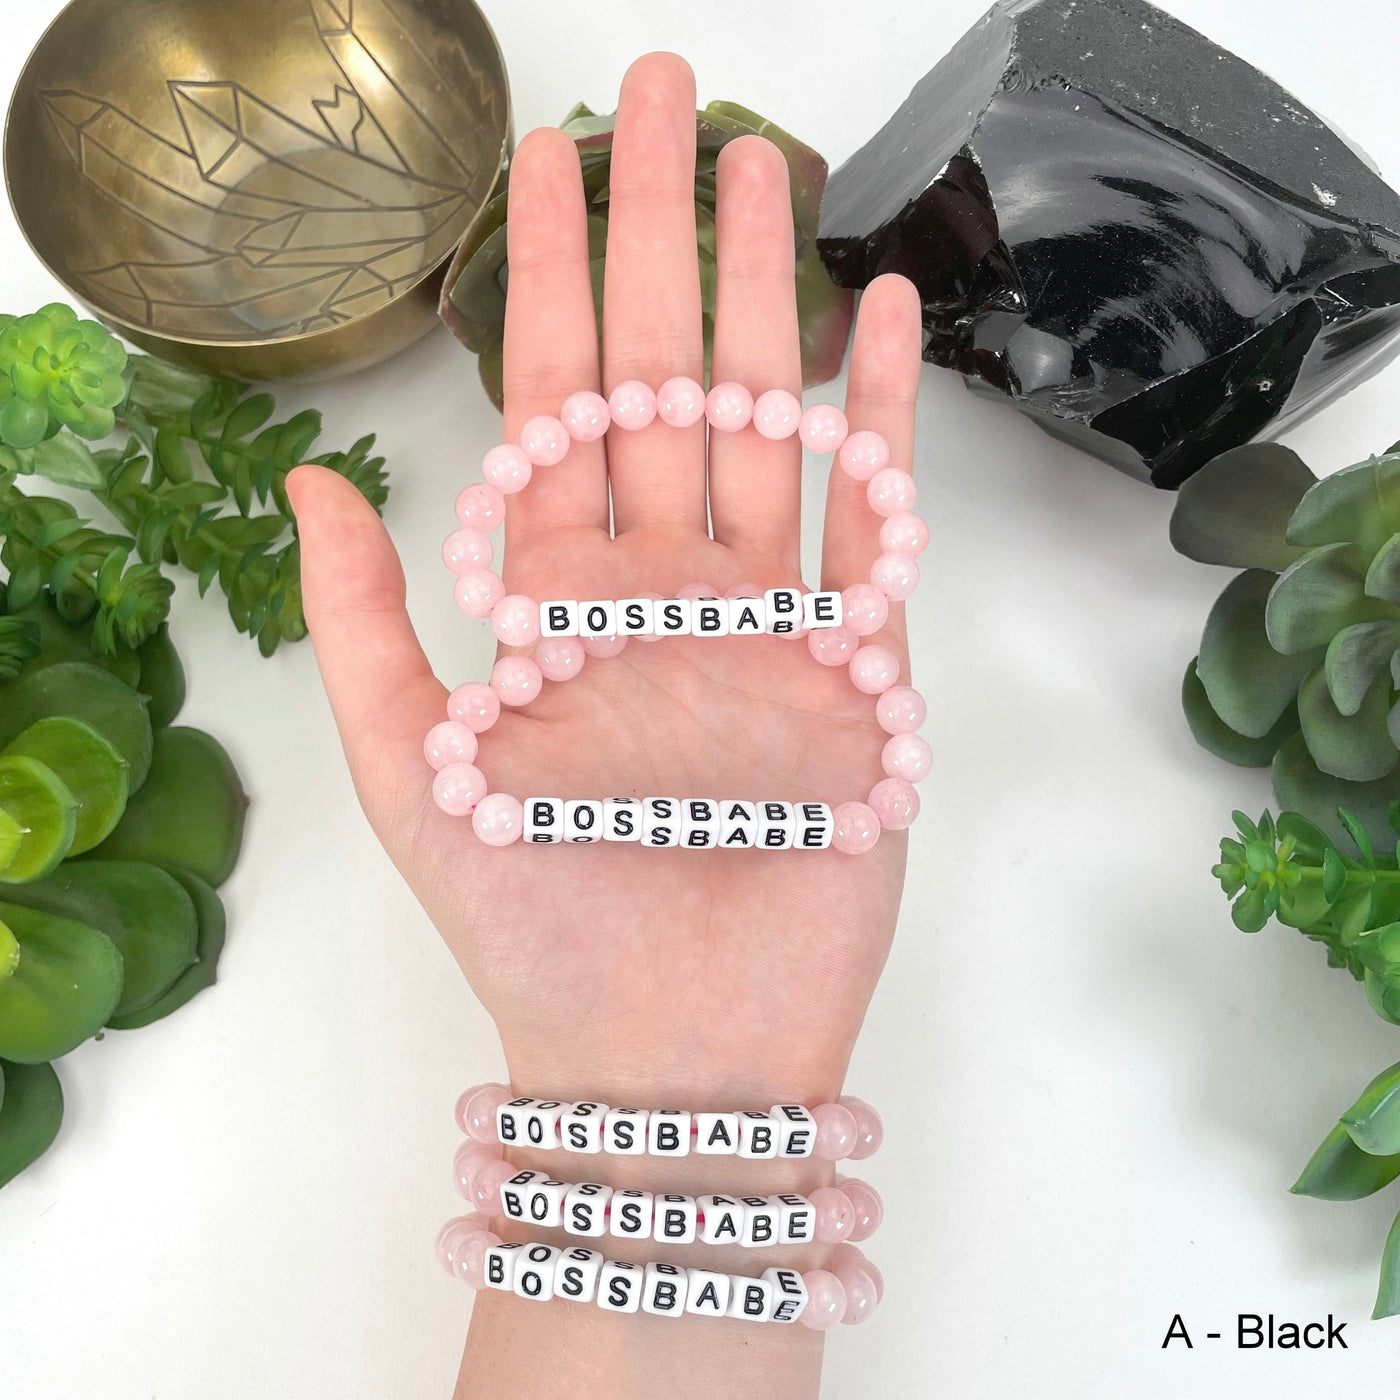 black "BOSSBABE" letter bead option in hand and on wrist for color reference